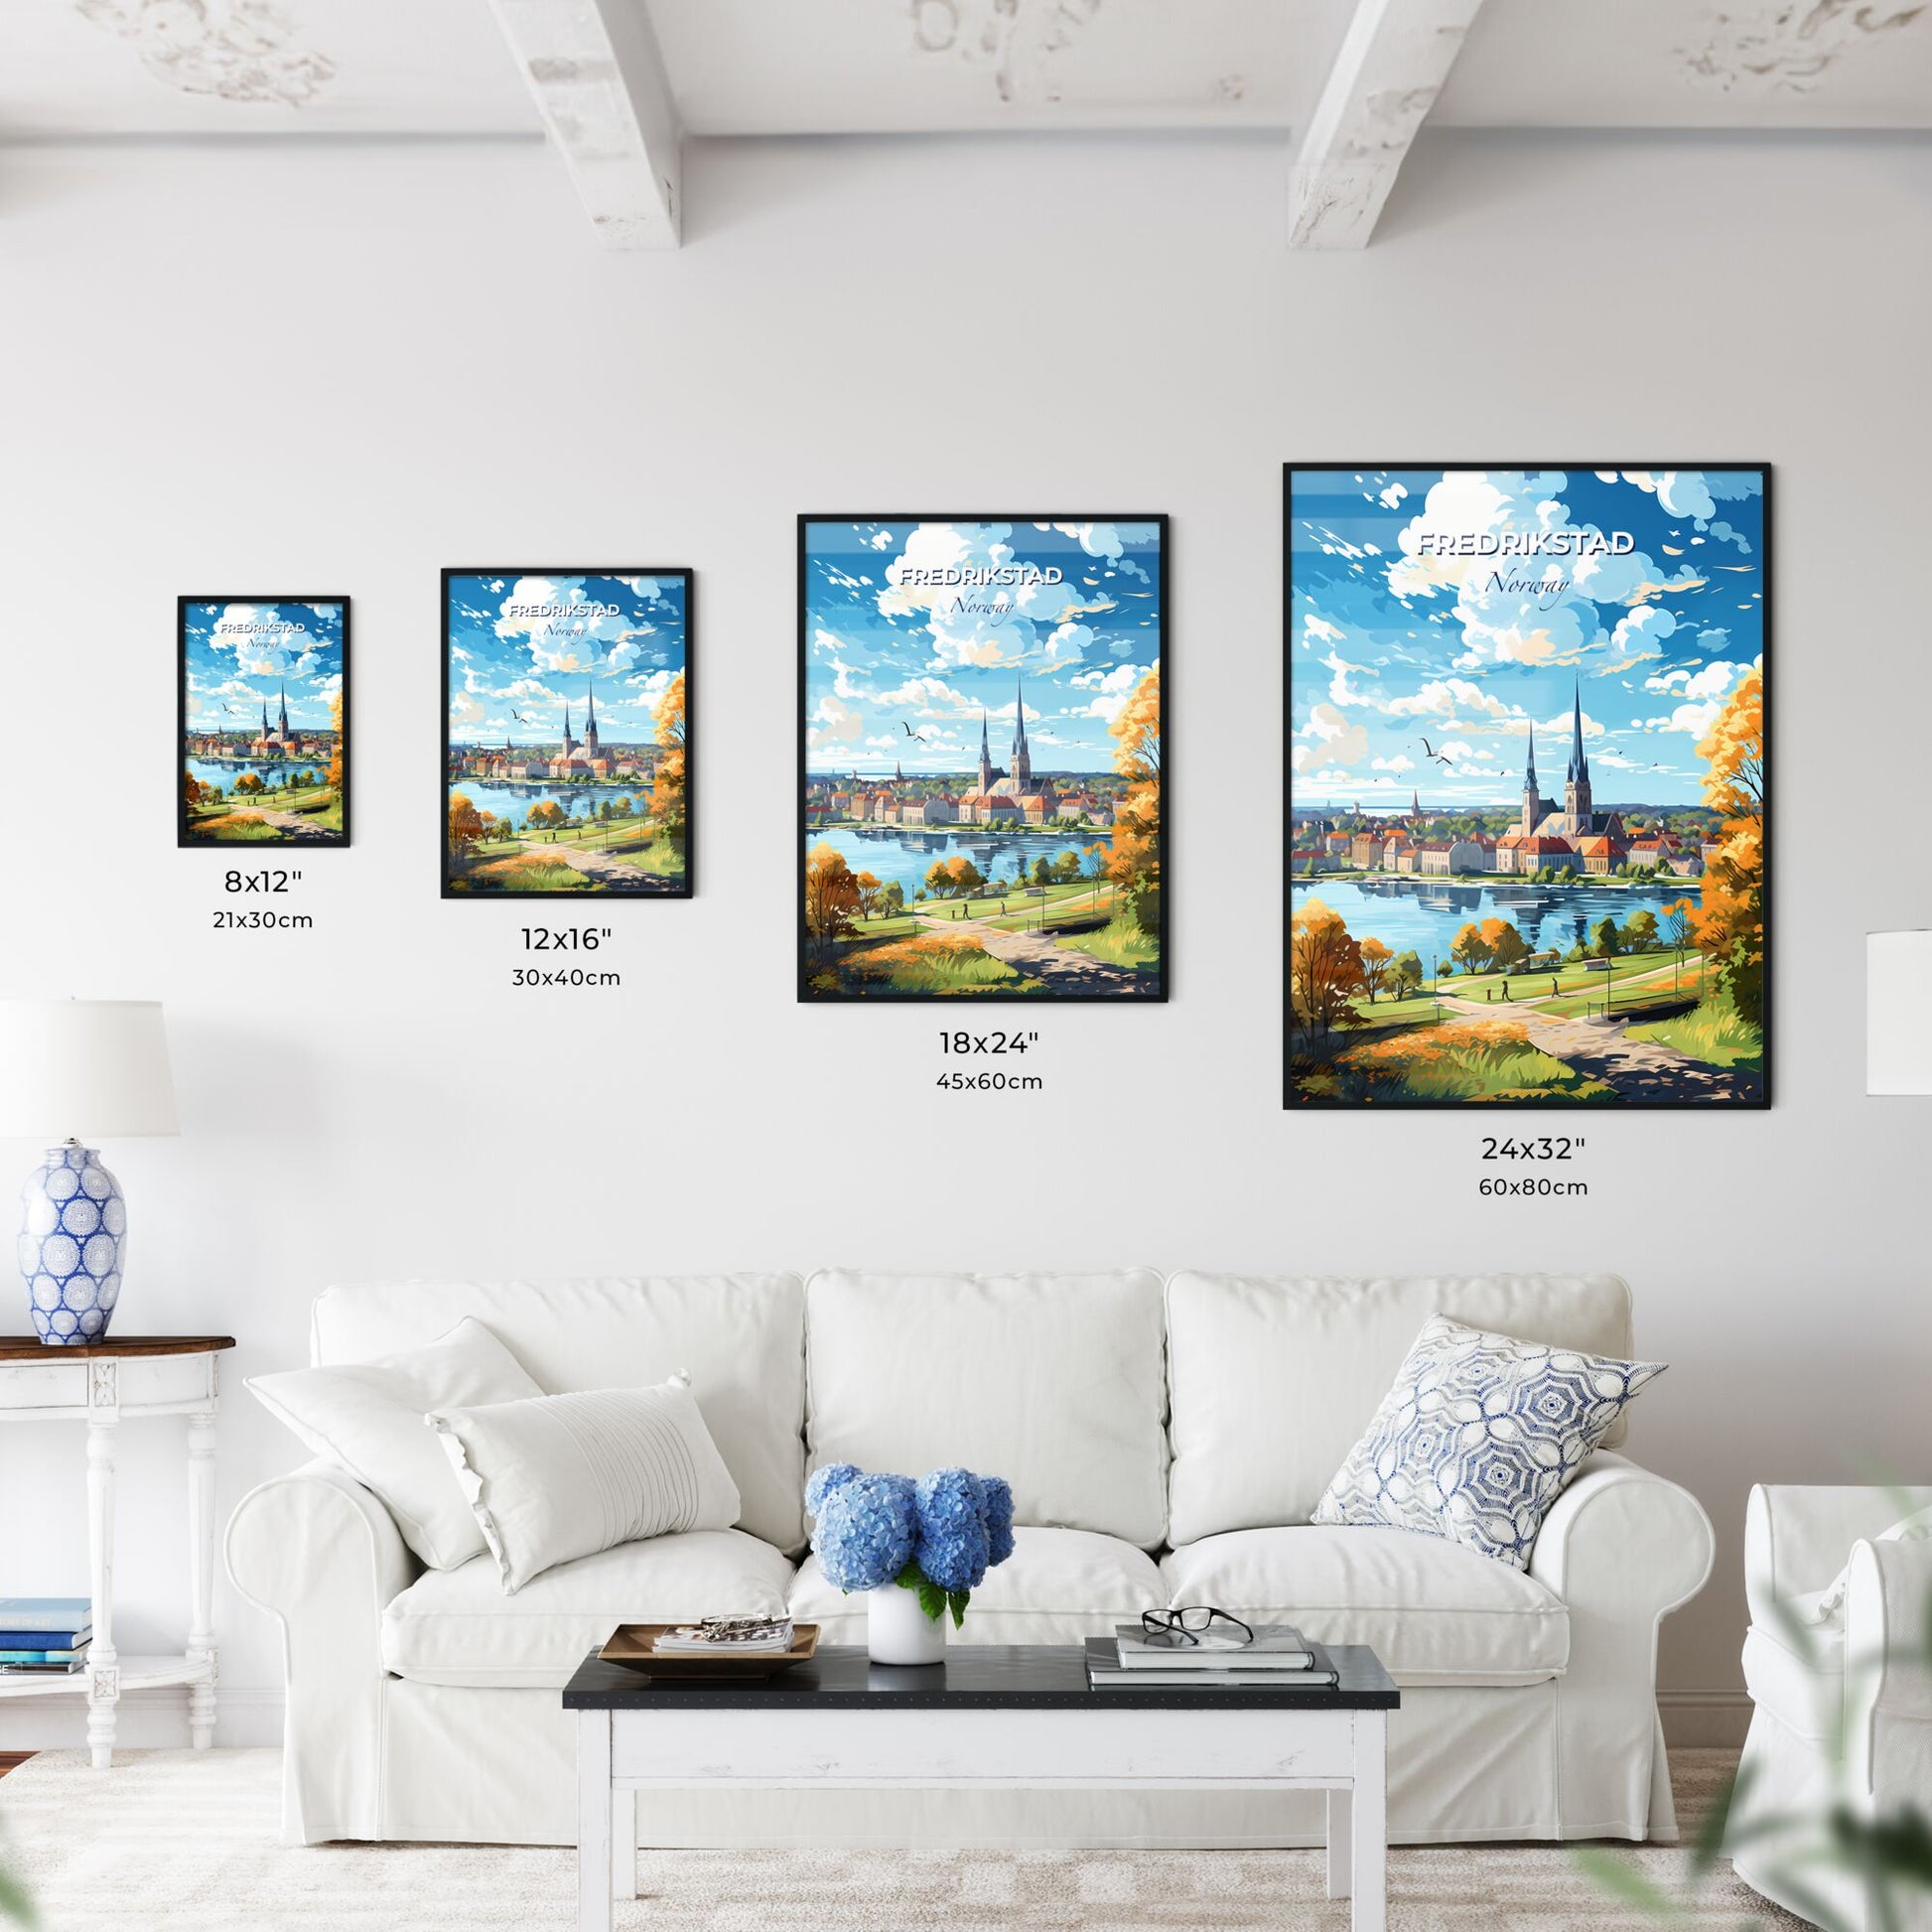 Fredrikstad Norway Skyline - A City By A Lake - Customizable Travel Gift Default Title